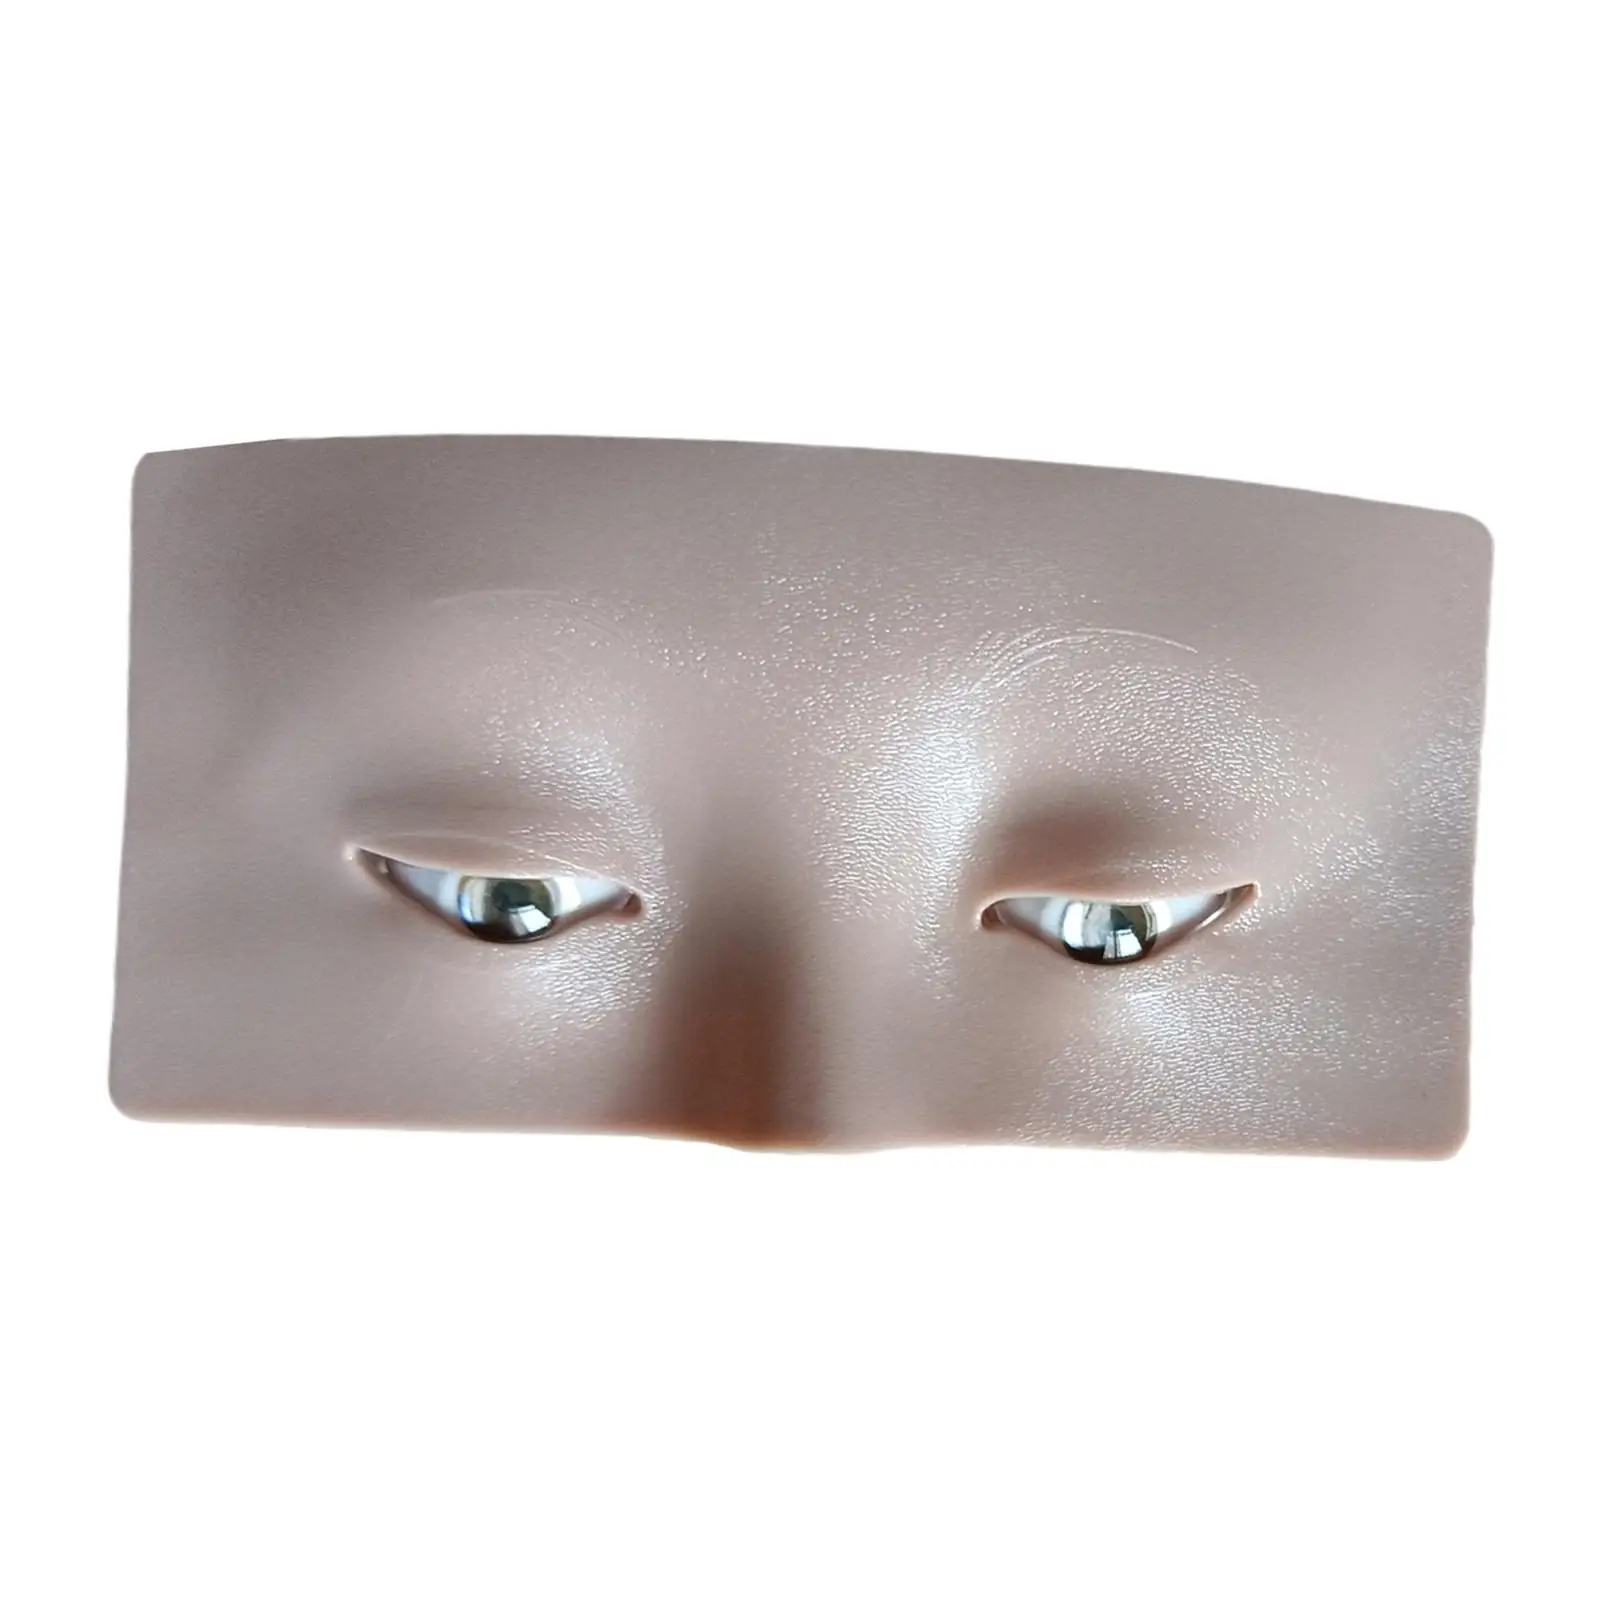 eye Makeup Practice Face 17x9cm Accessory Easy to Use Reusable for Makeup Training Cosmetologist Makeup Artists Beginners